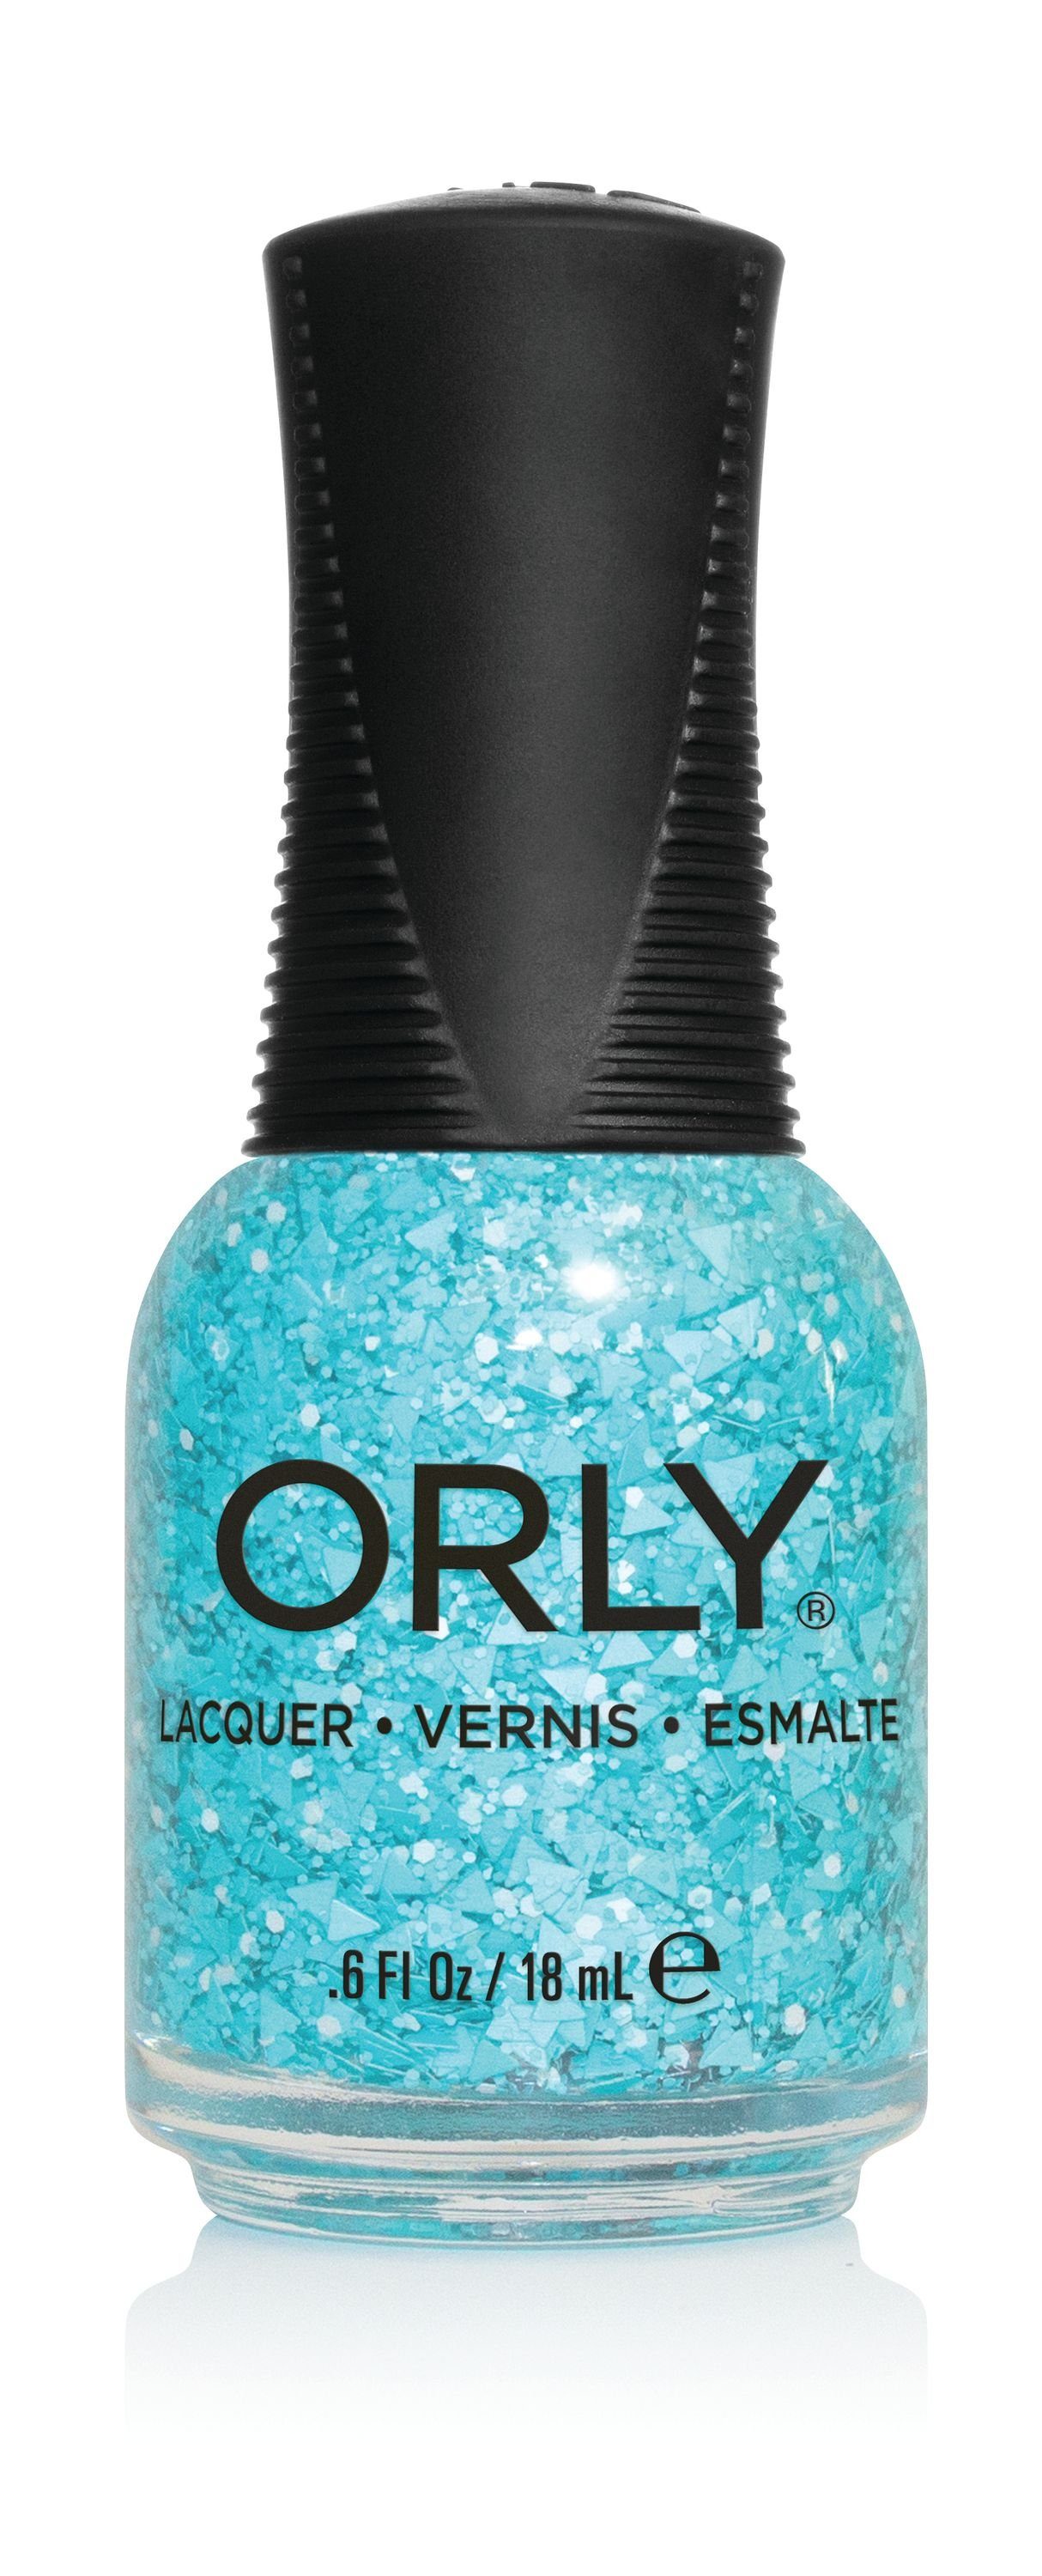 ORLY Nagellack Nagellack Big Teal, ORLY What's - The 18ML